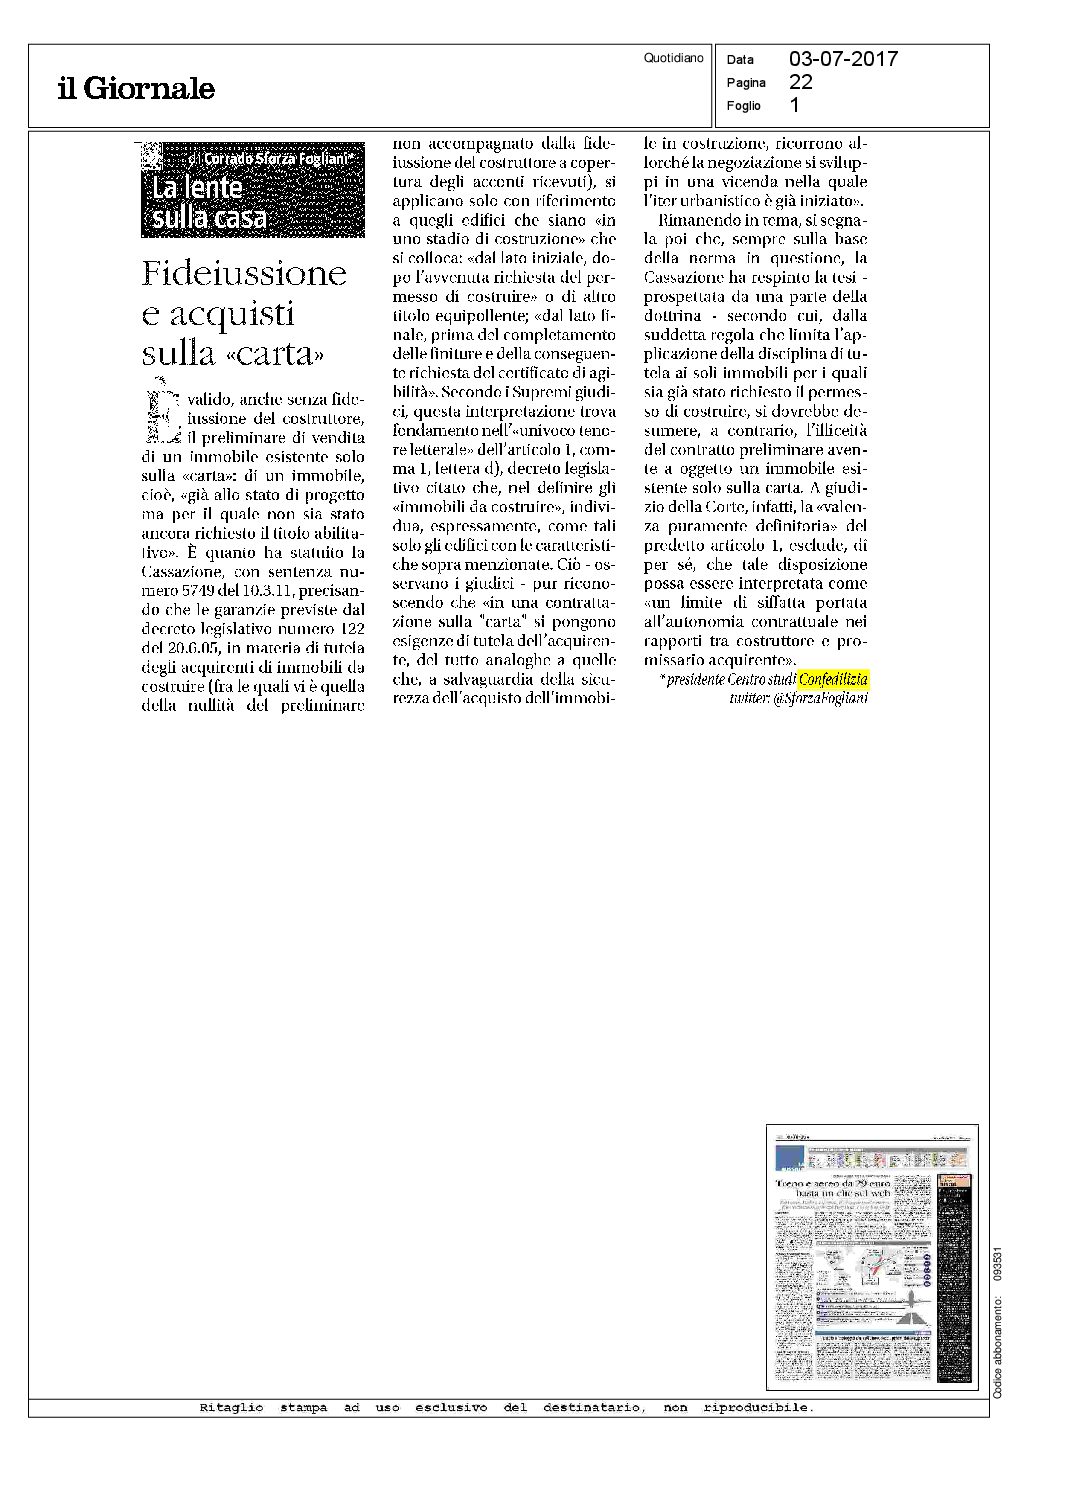 Giornale_3.7.17_2